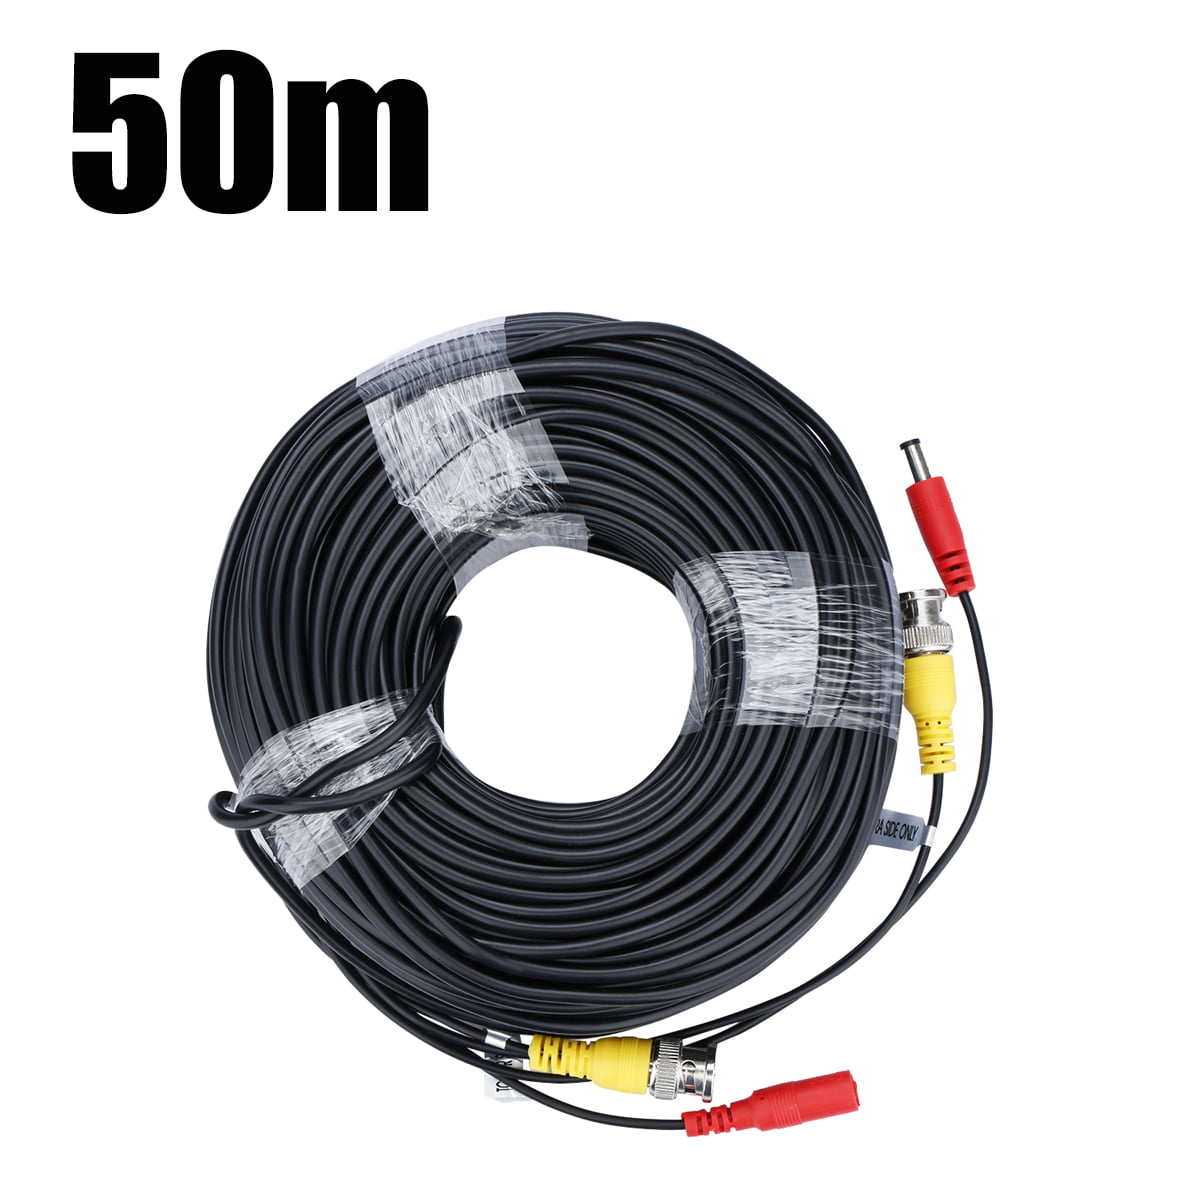 5-50M BNC CCTV Security Video Camera DVR Record Data Power Extension Wire Cable 